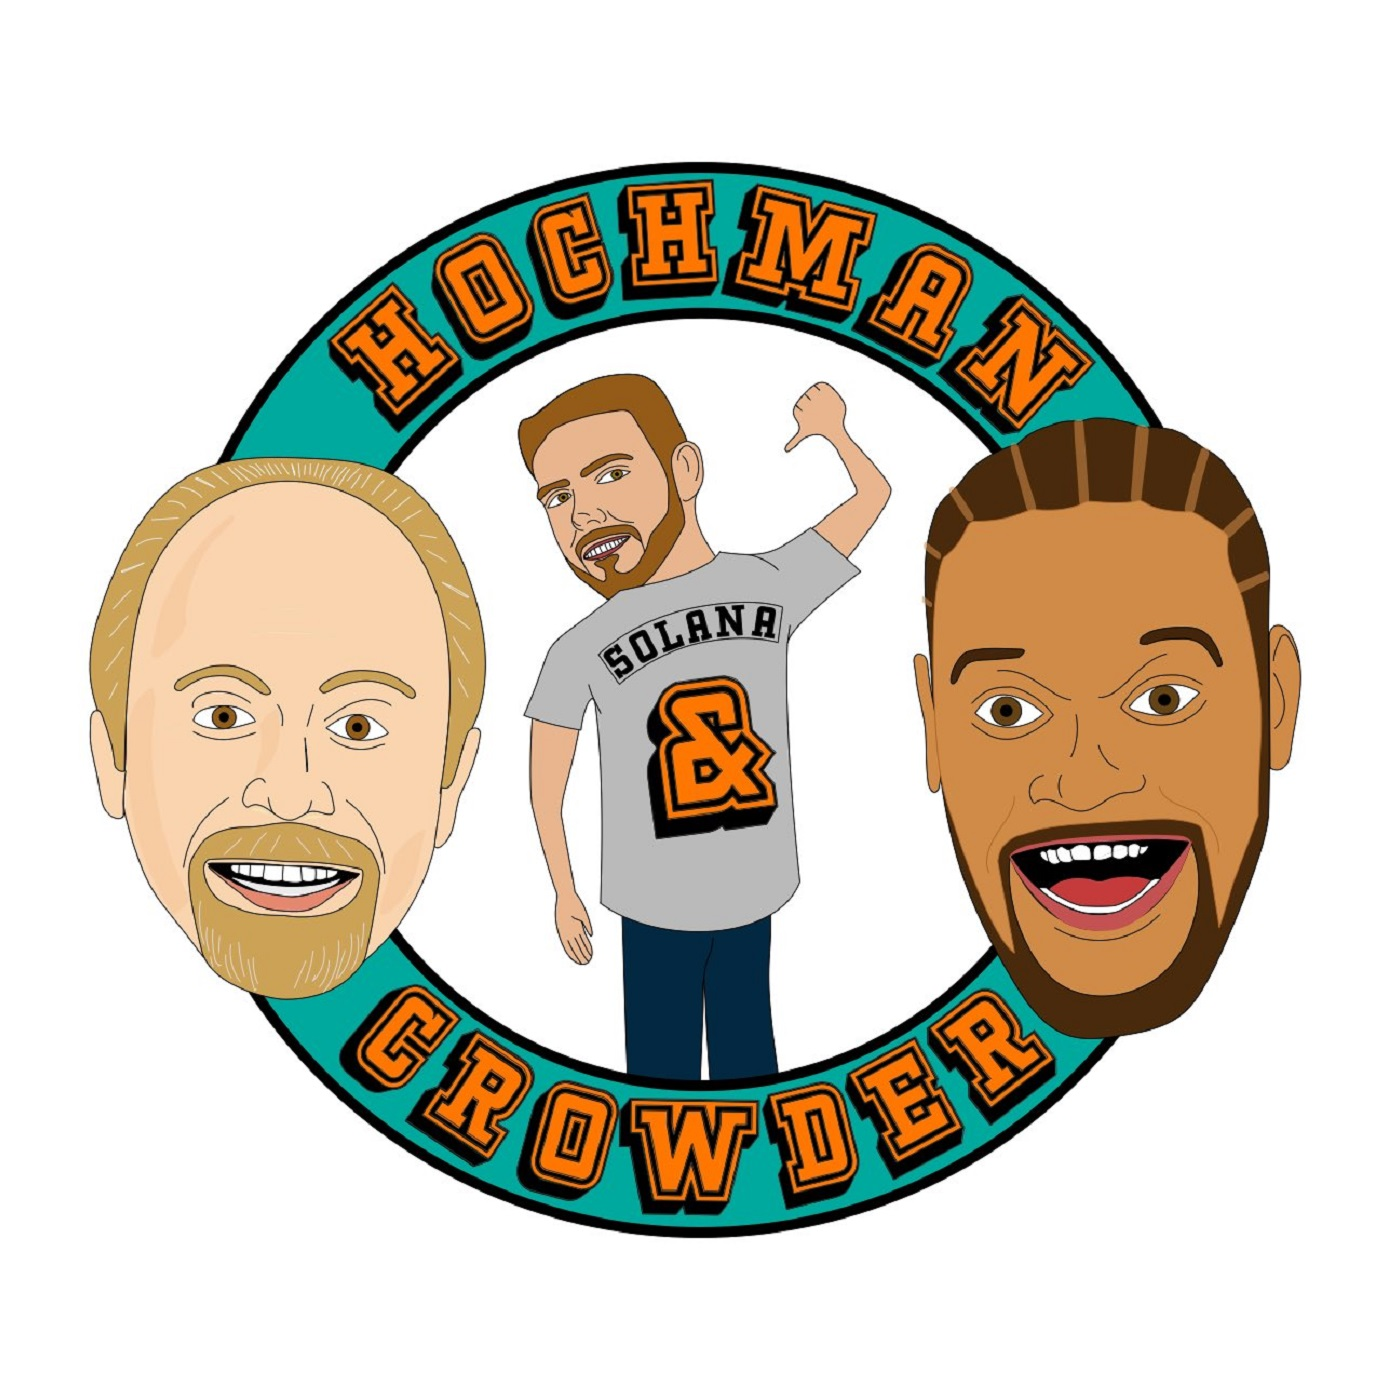 08-12-2019 - Hoch and Crowder Podcast Hour 4